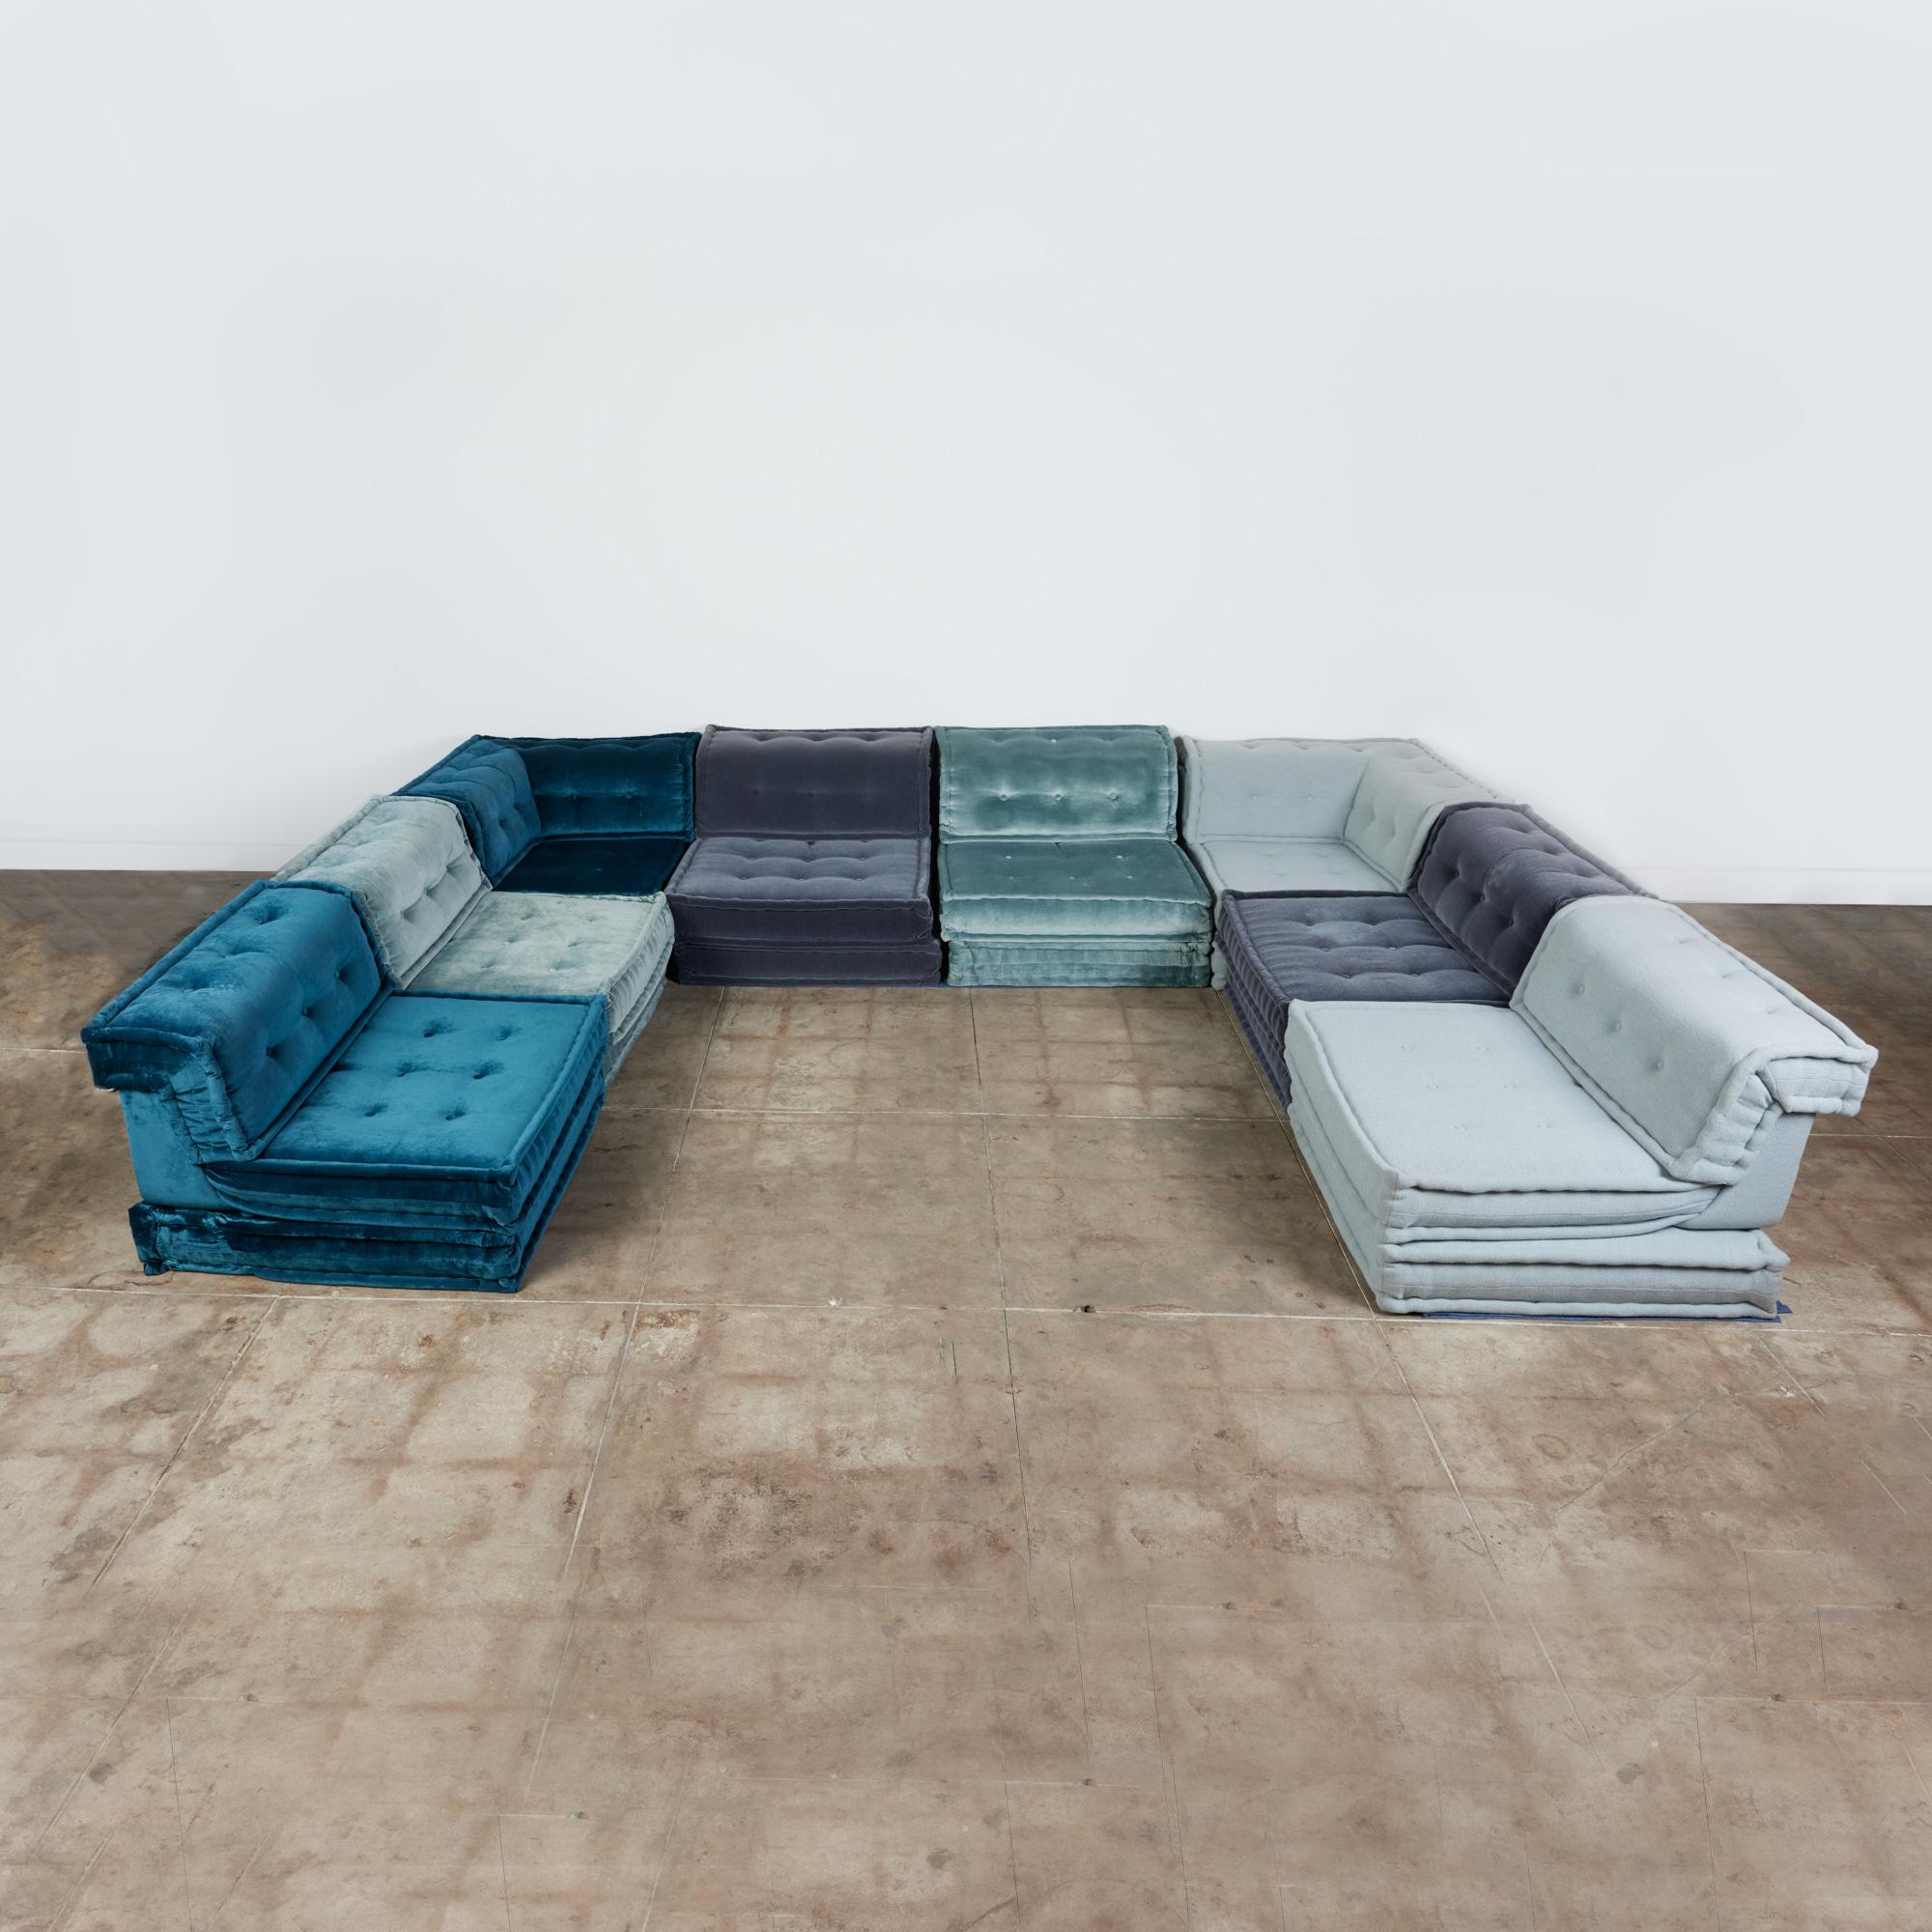 The Mah Jong sofa for Roche Bobois originally designed in the1970s by Hans Hopfer is a design that has endured. This example made in Italy, c.2019 has eight complete seats, two of which are corner seating units. The sofa has three different textures